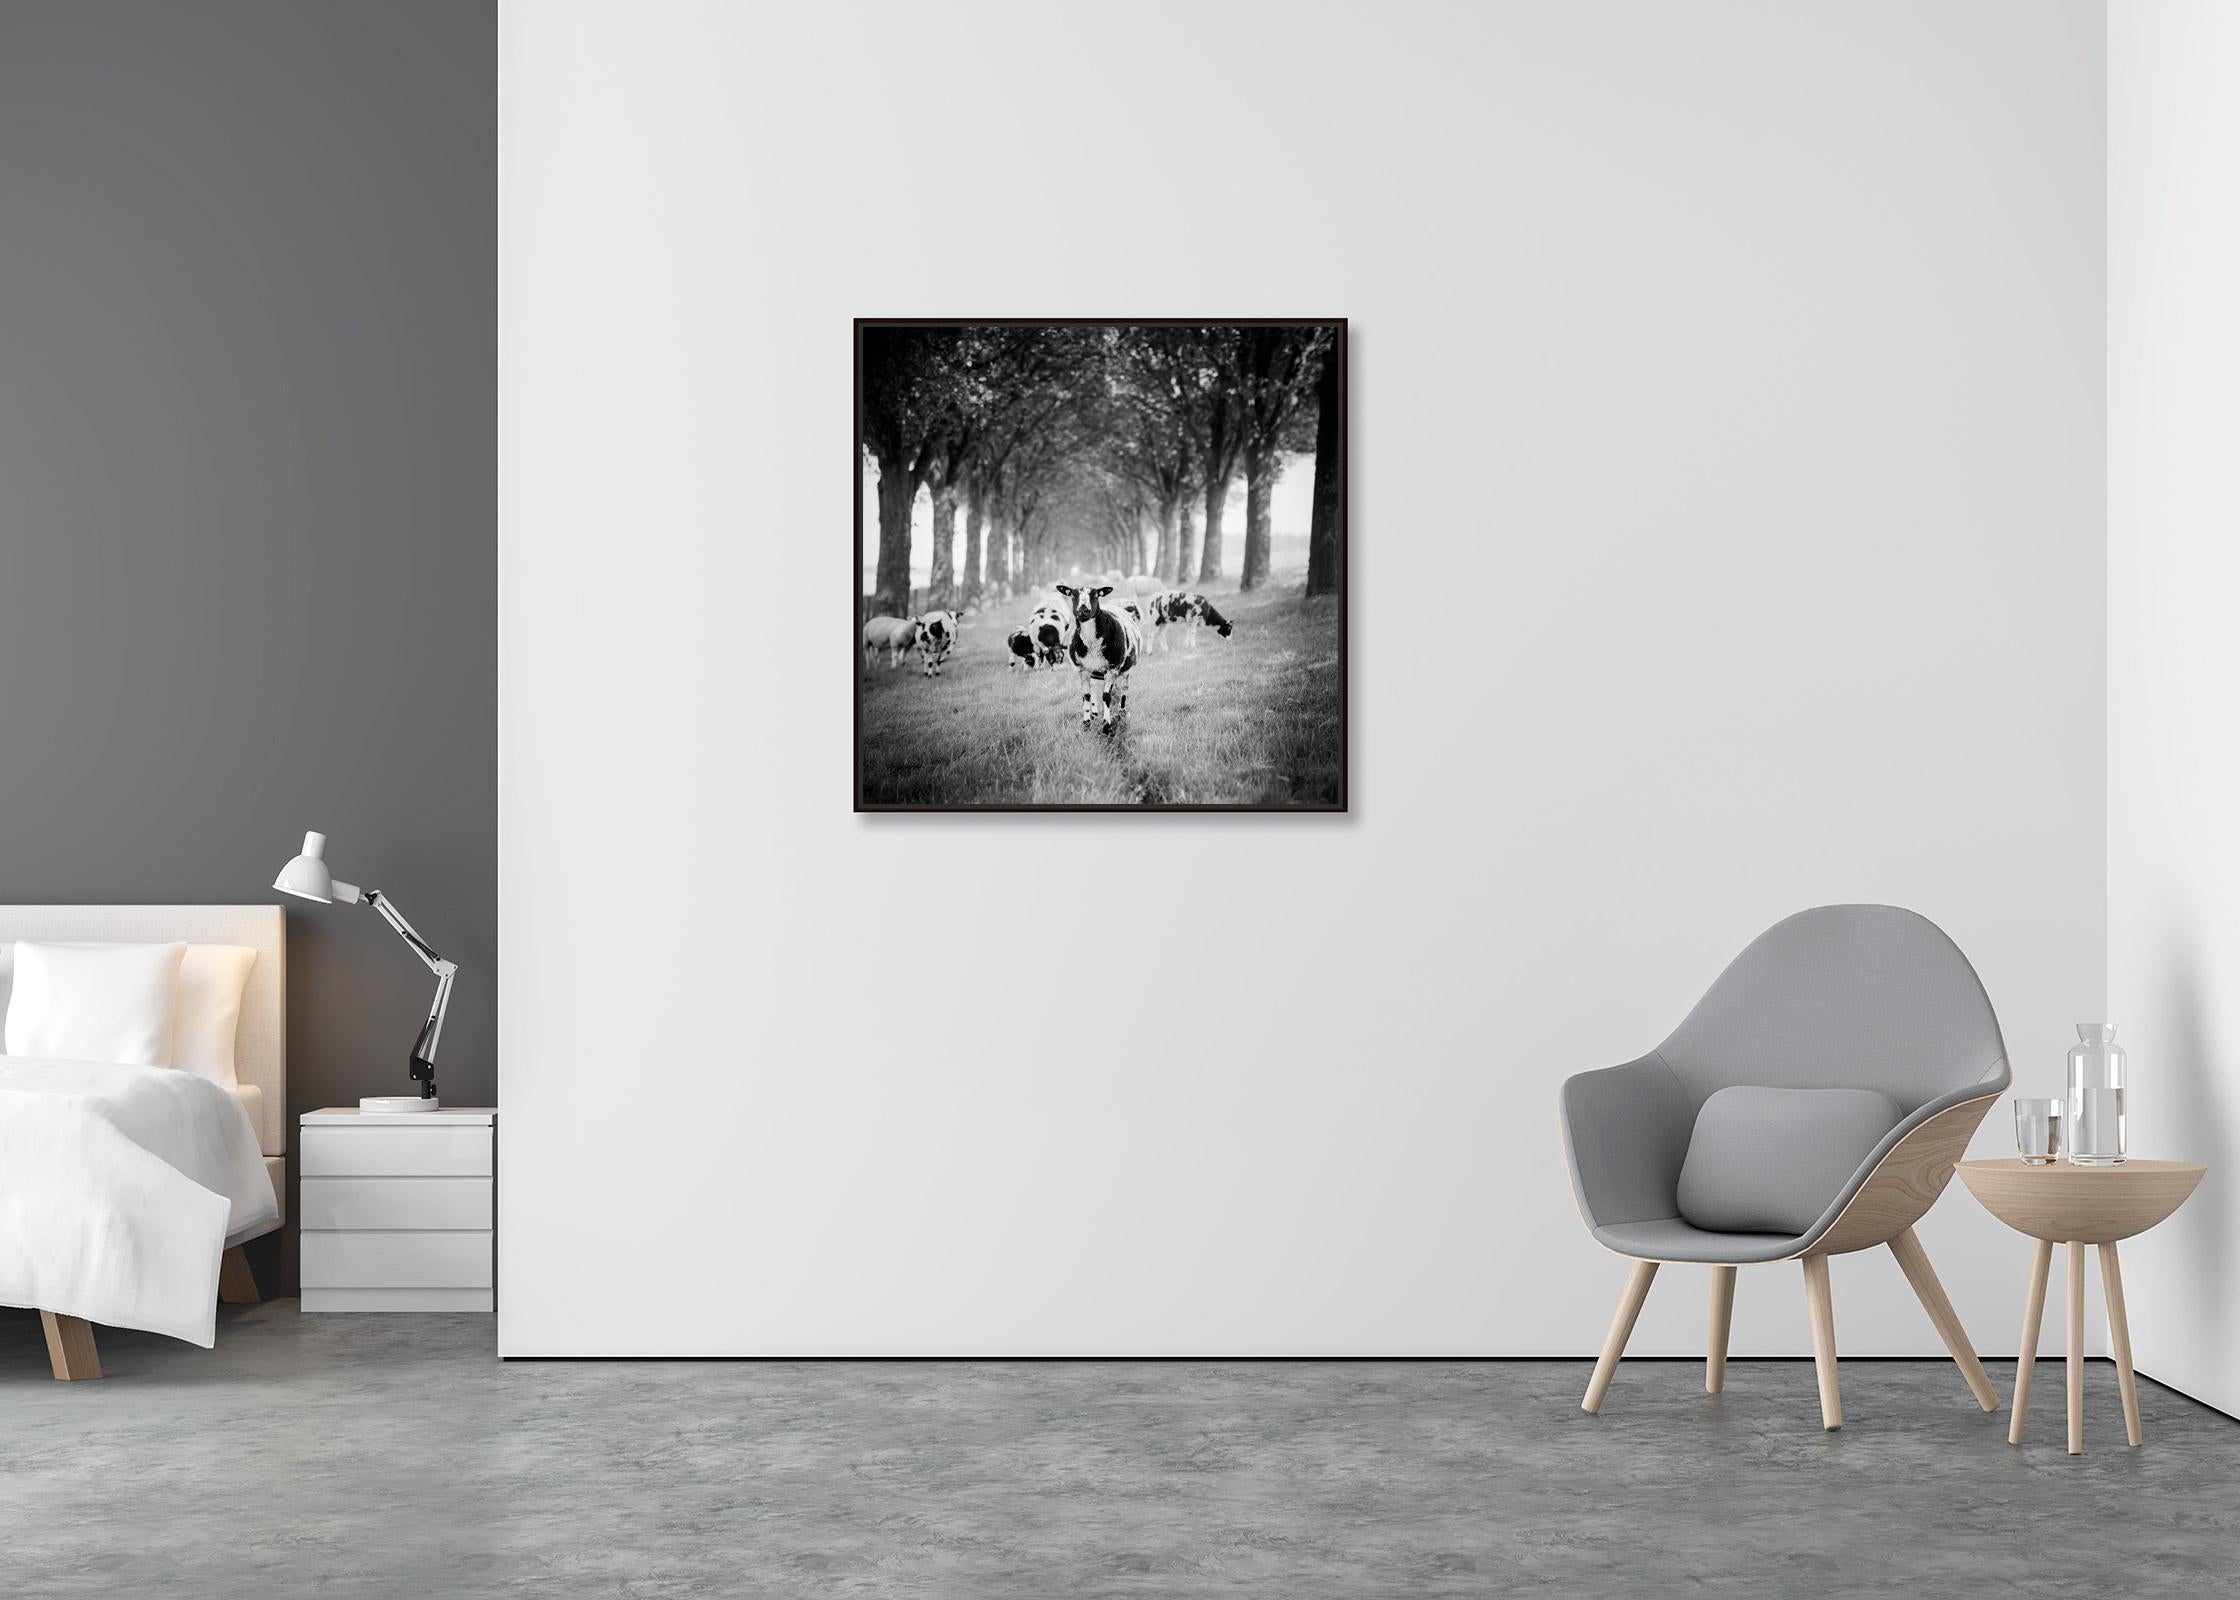 Shaun the Sheep, Tree Avenue, black and white photography, fine art, landscape - Contemporary Photograph by Gerald Berghammer